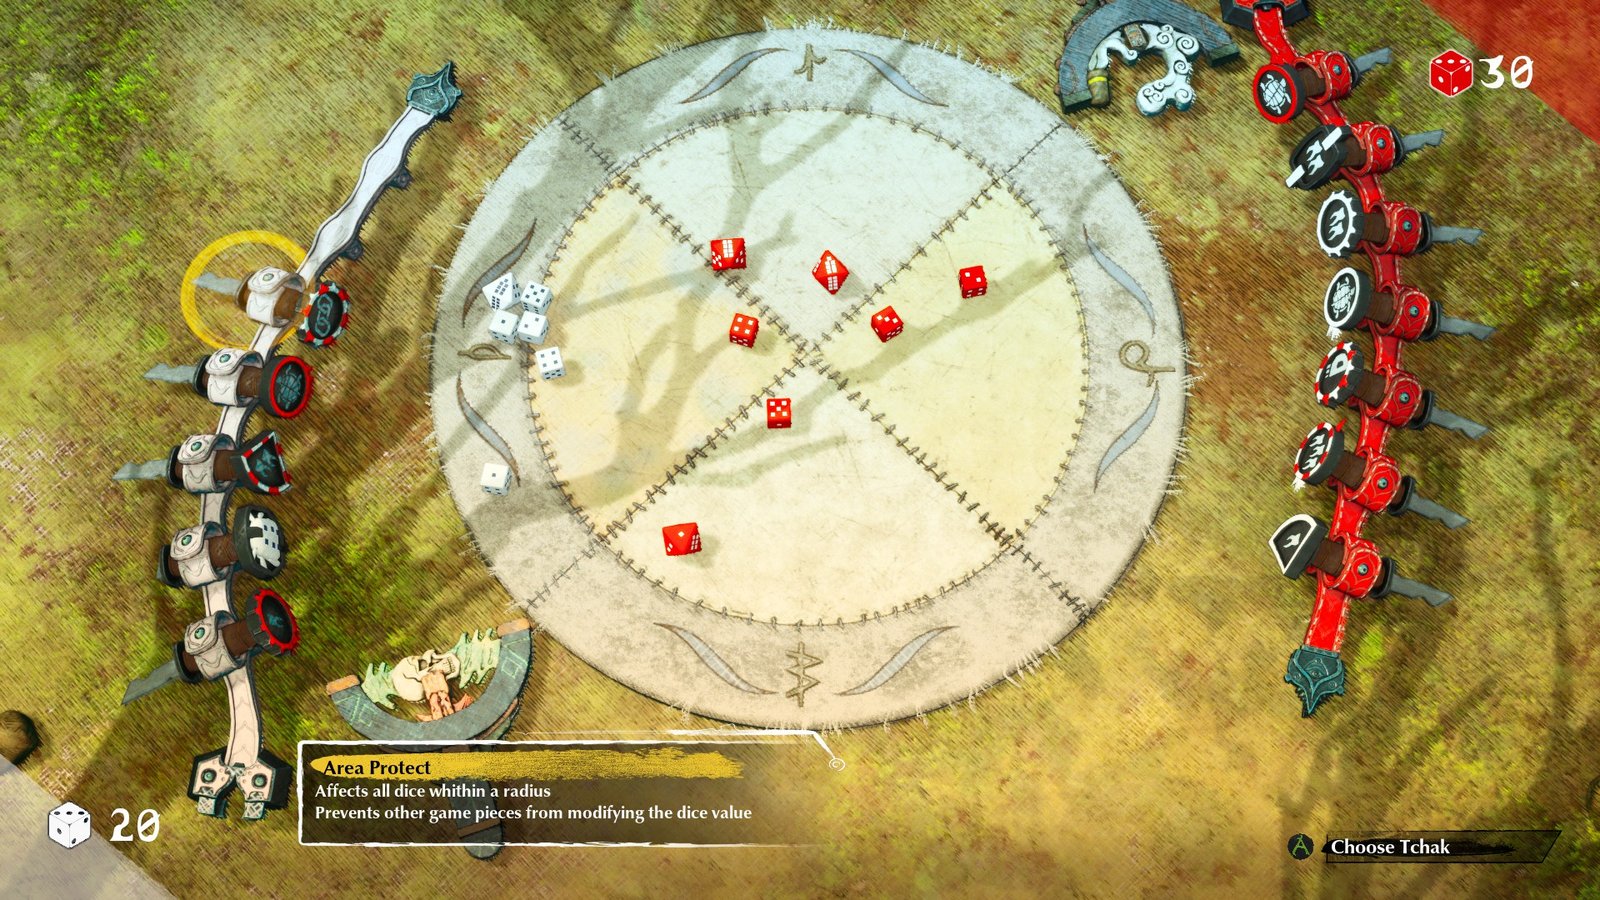 The dice ritual being played in Clash: Artifacts of Chaos.